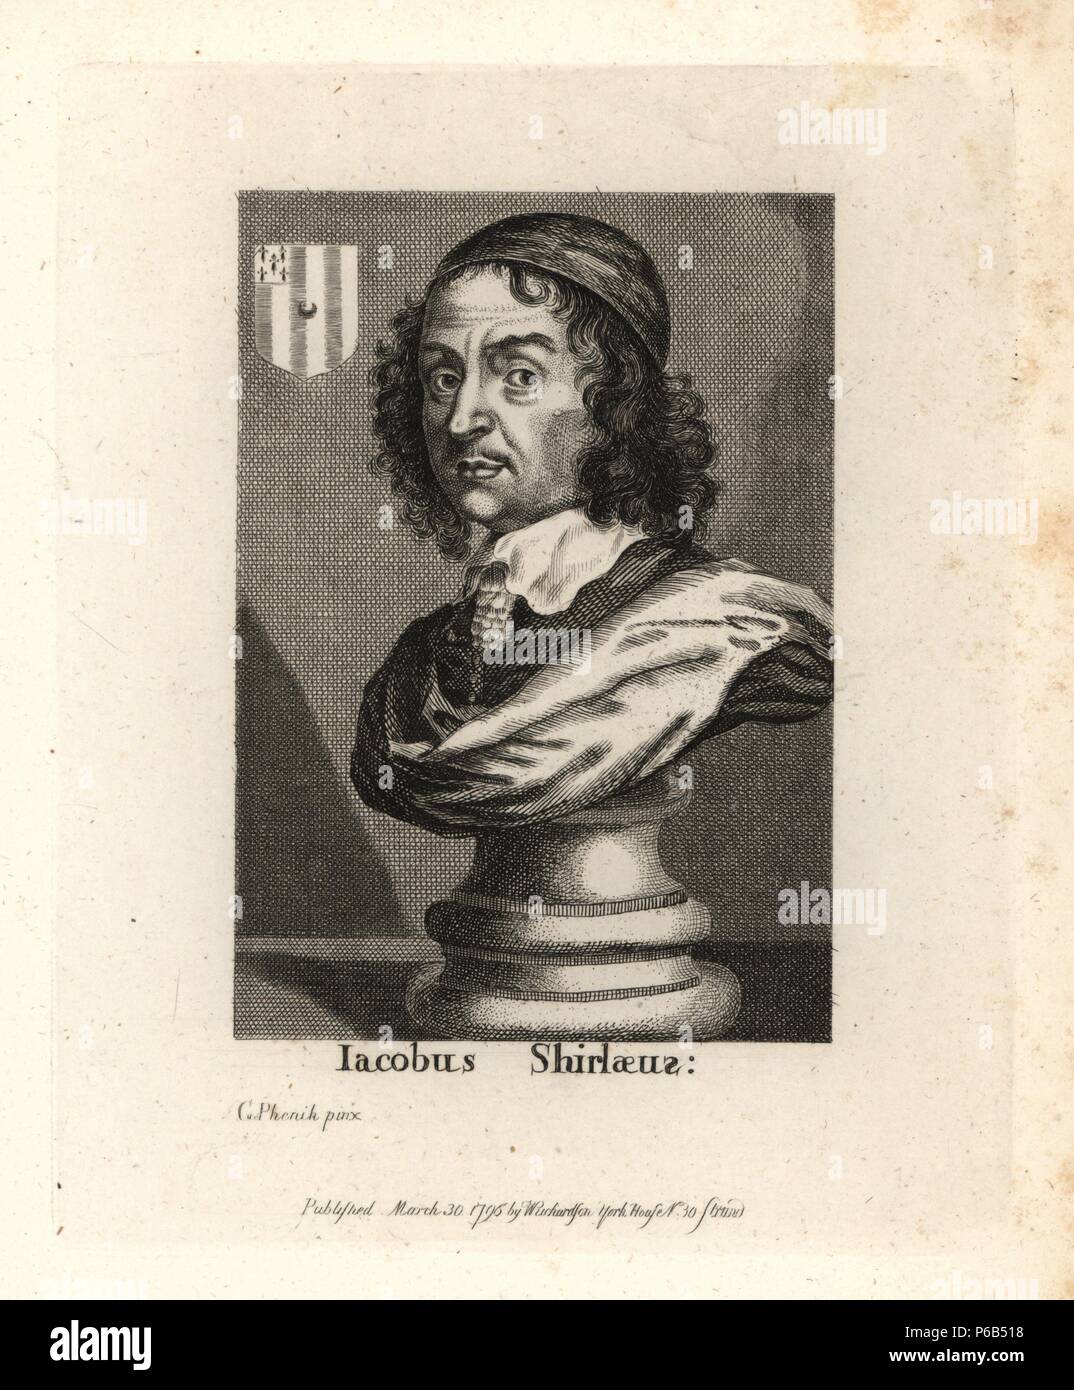 Jacobus Shirlaeus, James Shirley, poet and dramatist (1596-1666). From a scarce print engraved by R. Gaywood prefixed to Shirley's 'Plays' 1652, drawn by G. Phenik. Copperplate engraving from Richardson's 'Portraits illustrating Granger's Biographical History of England,' London, 1792–1812. Published by William Richardson, printseller, London. James Granger (1723–1776) was an English clergyman, biographer, and print collector. Stock Photo